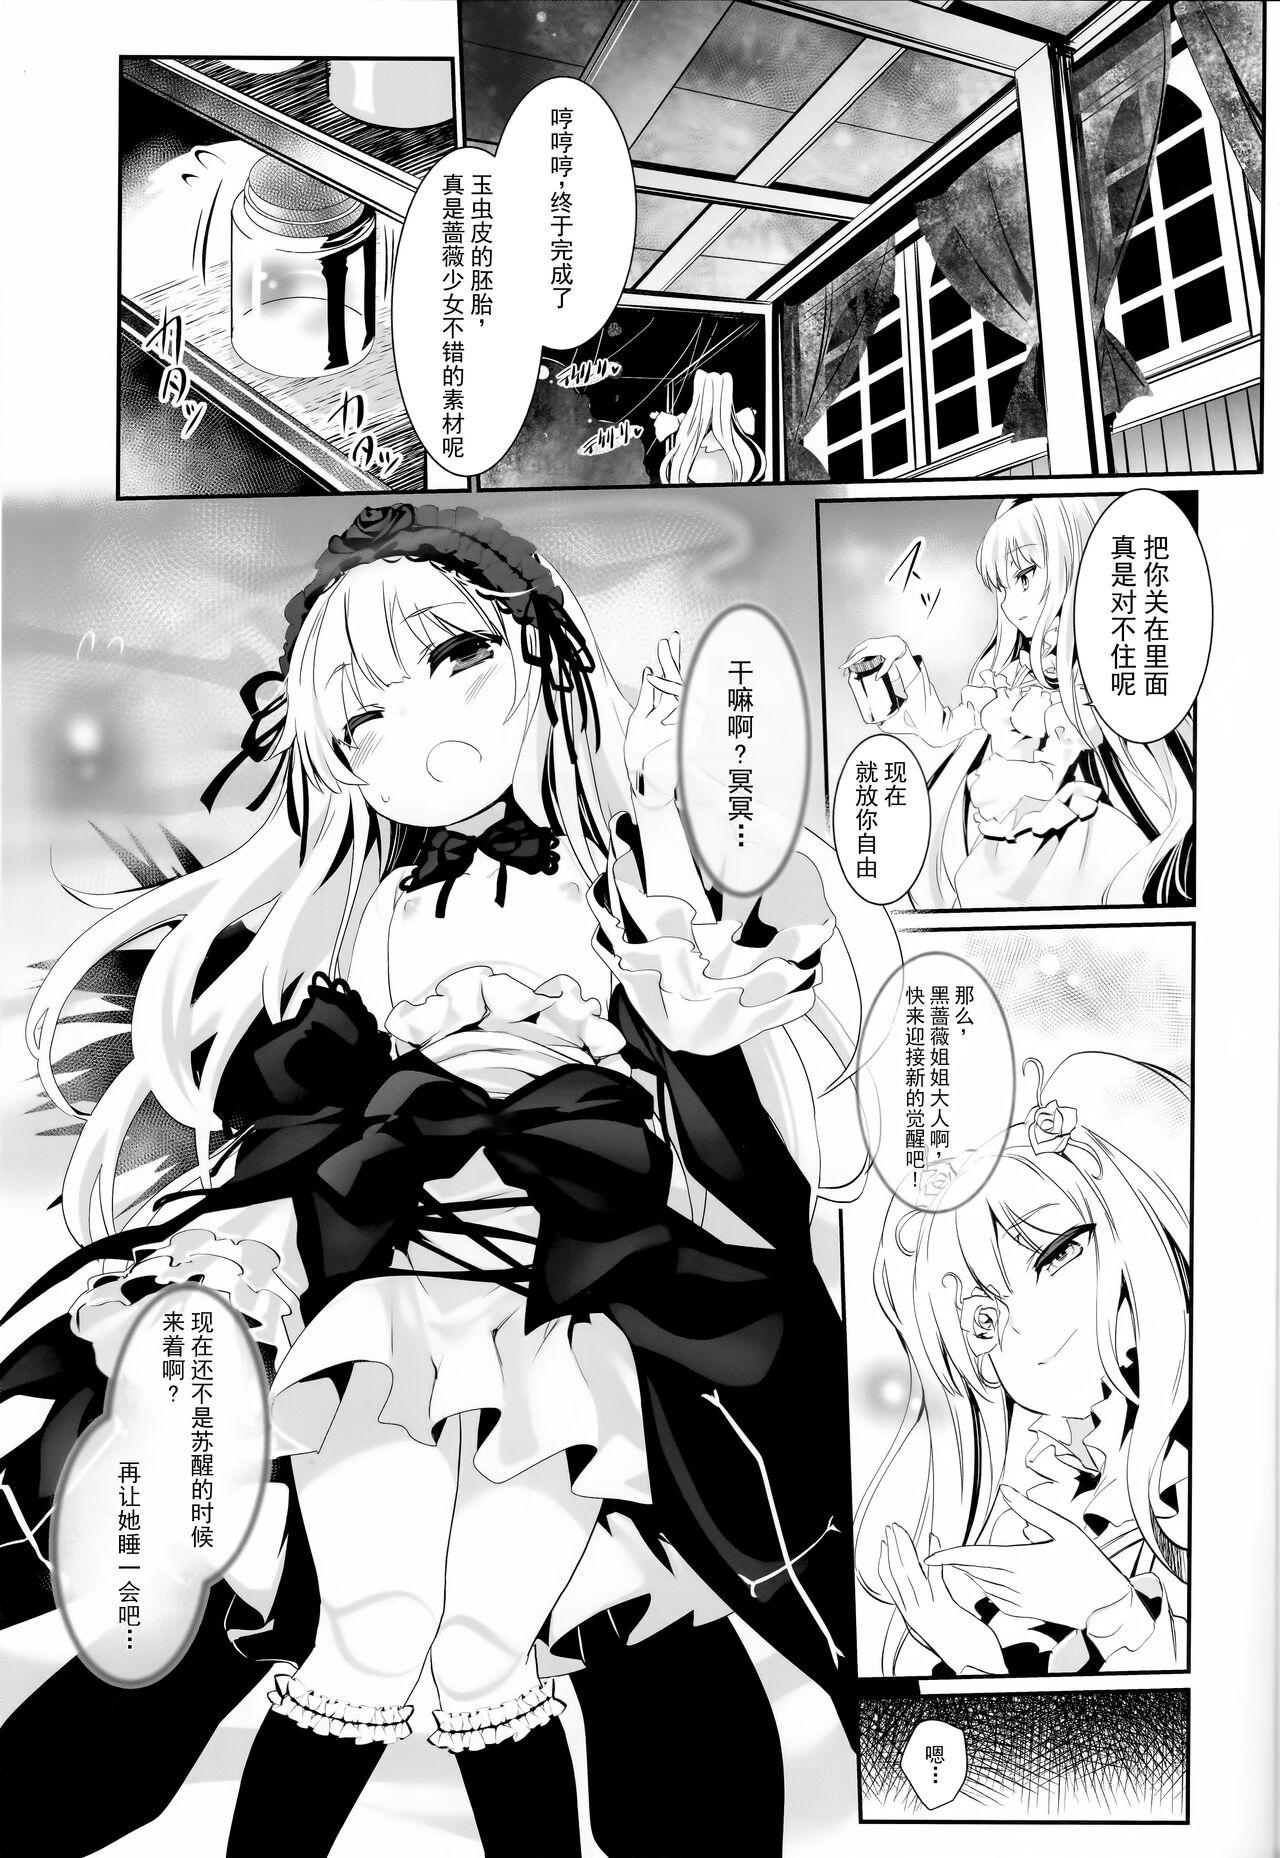 Gayemo Glamour Growth - Rozen maiden Shaven - Picture 2